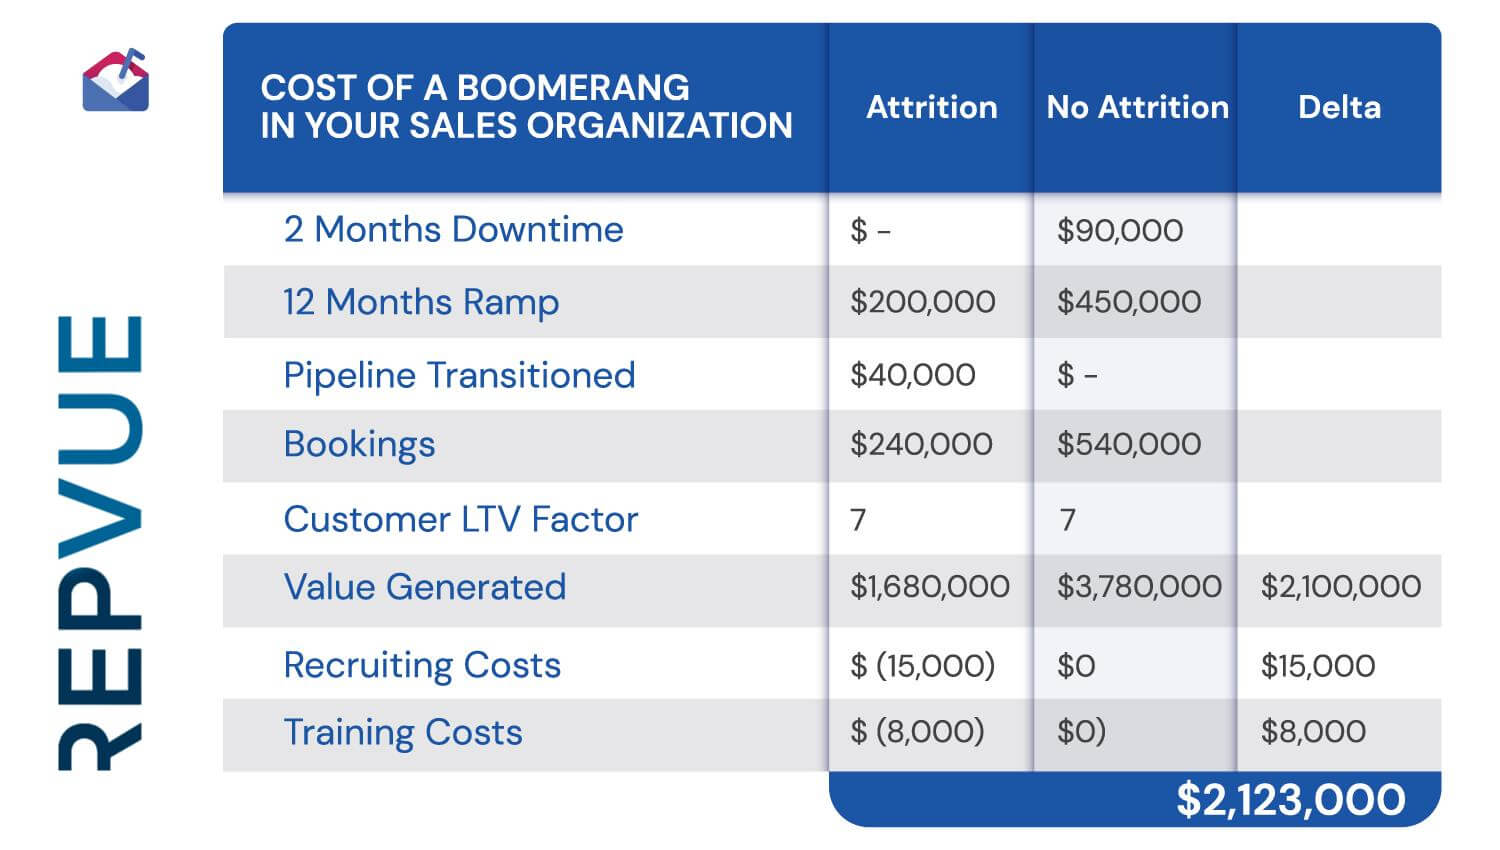 Cost of a Boomerang in Your Sales Organization